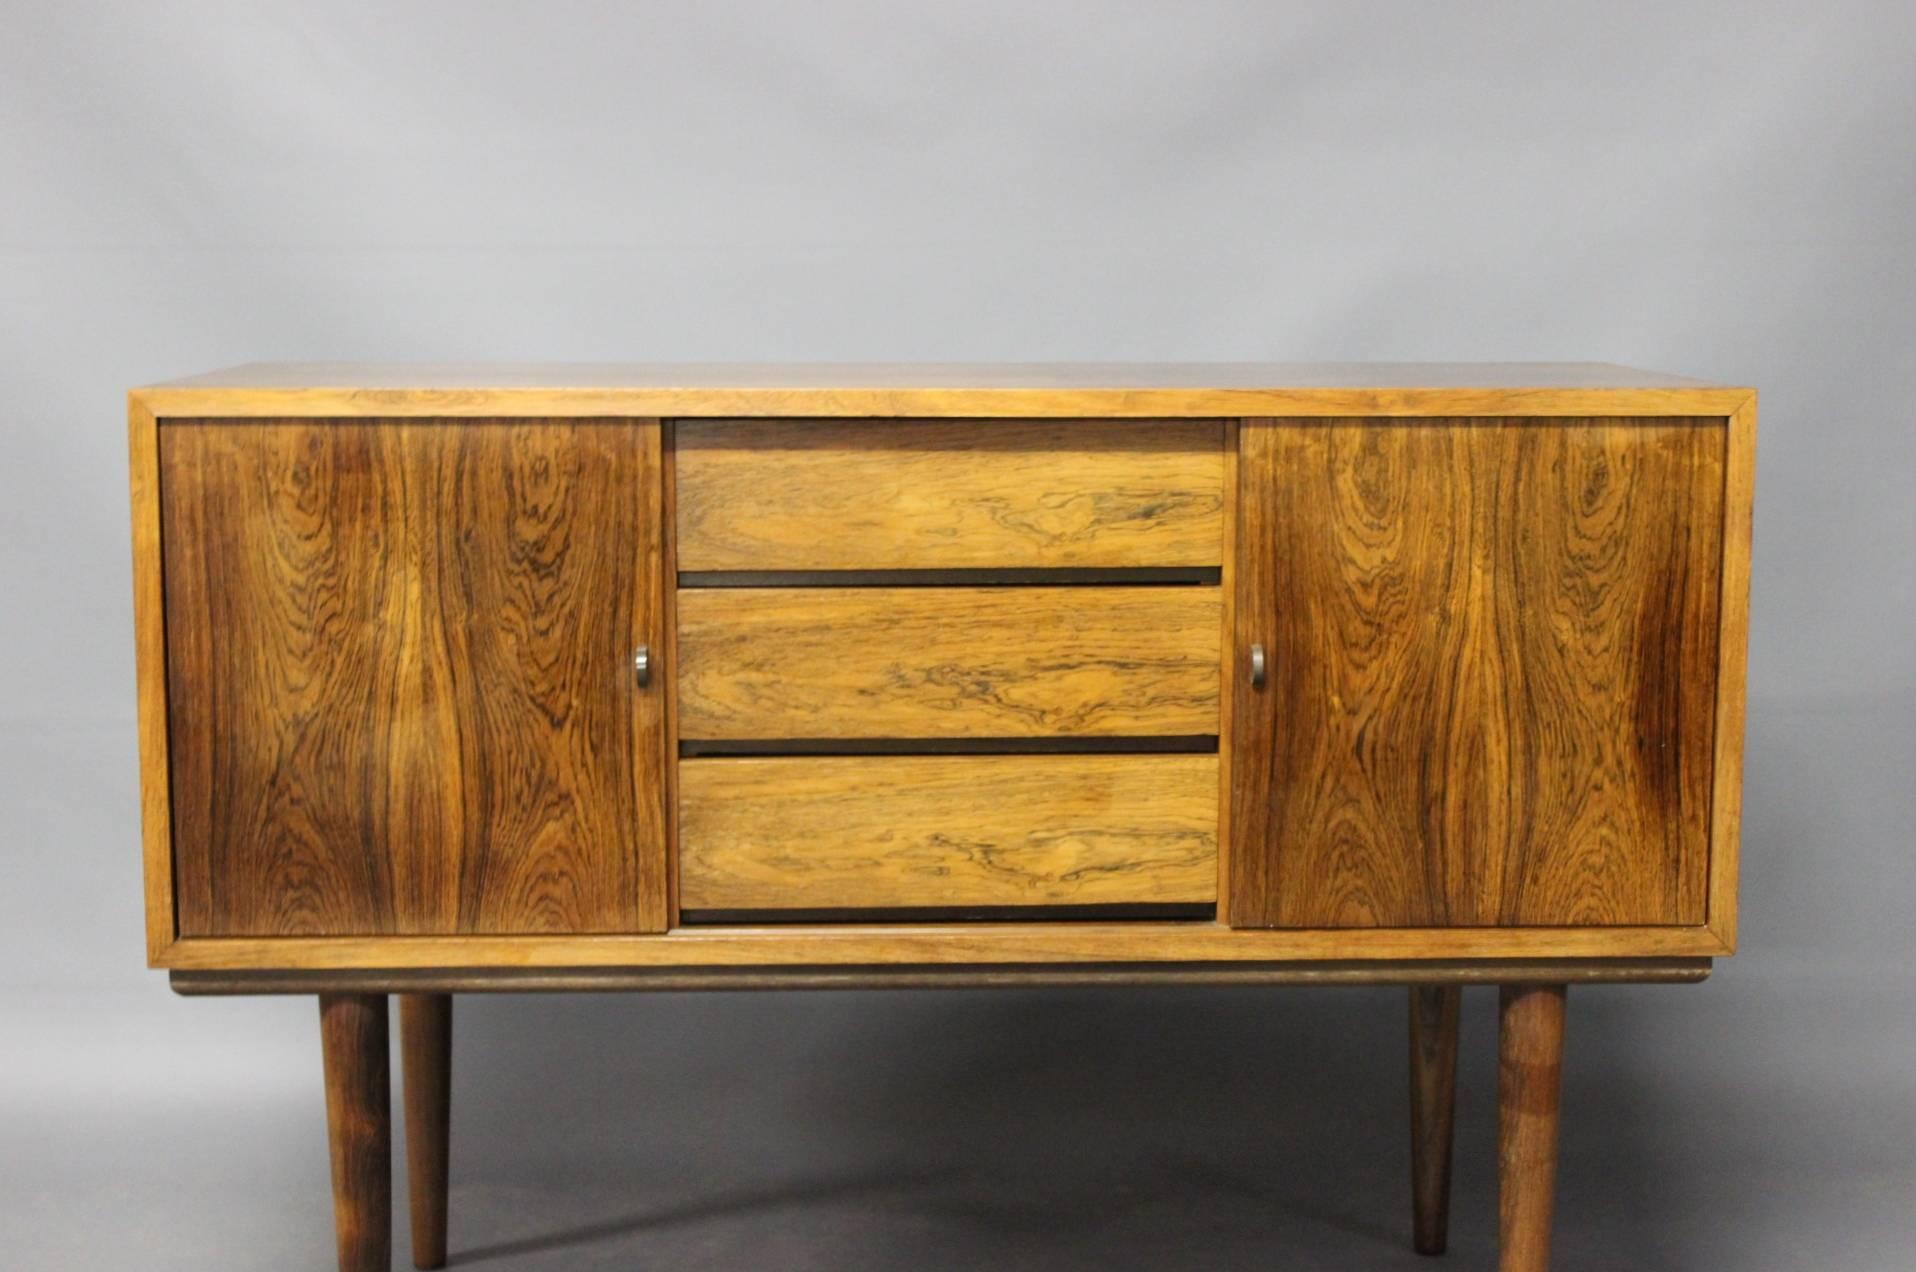 Scandinavian Modern Small Sideboard in Rosewood of Danish Design from the 1960s